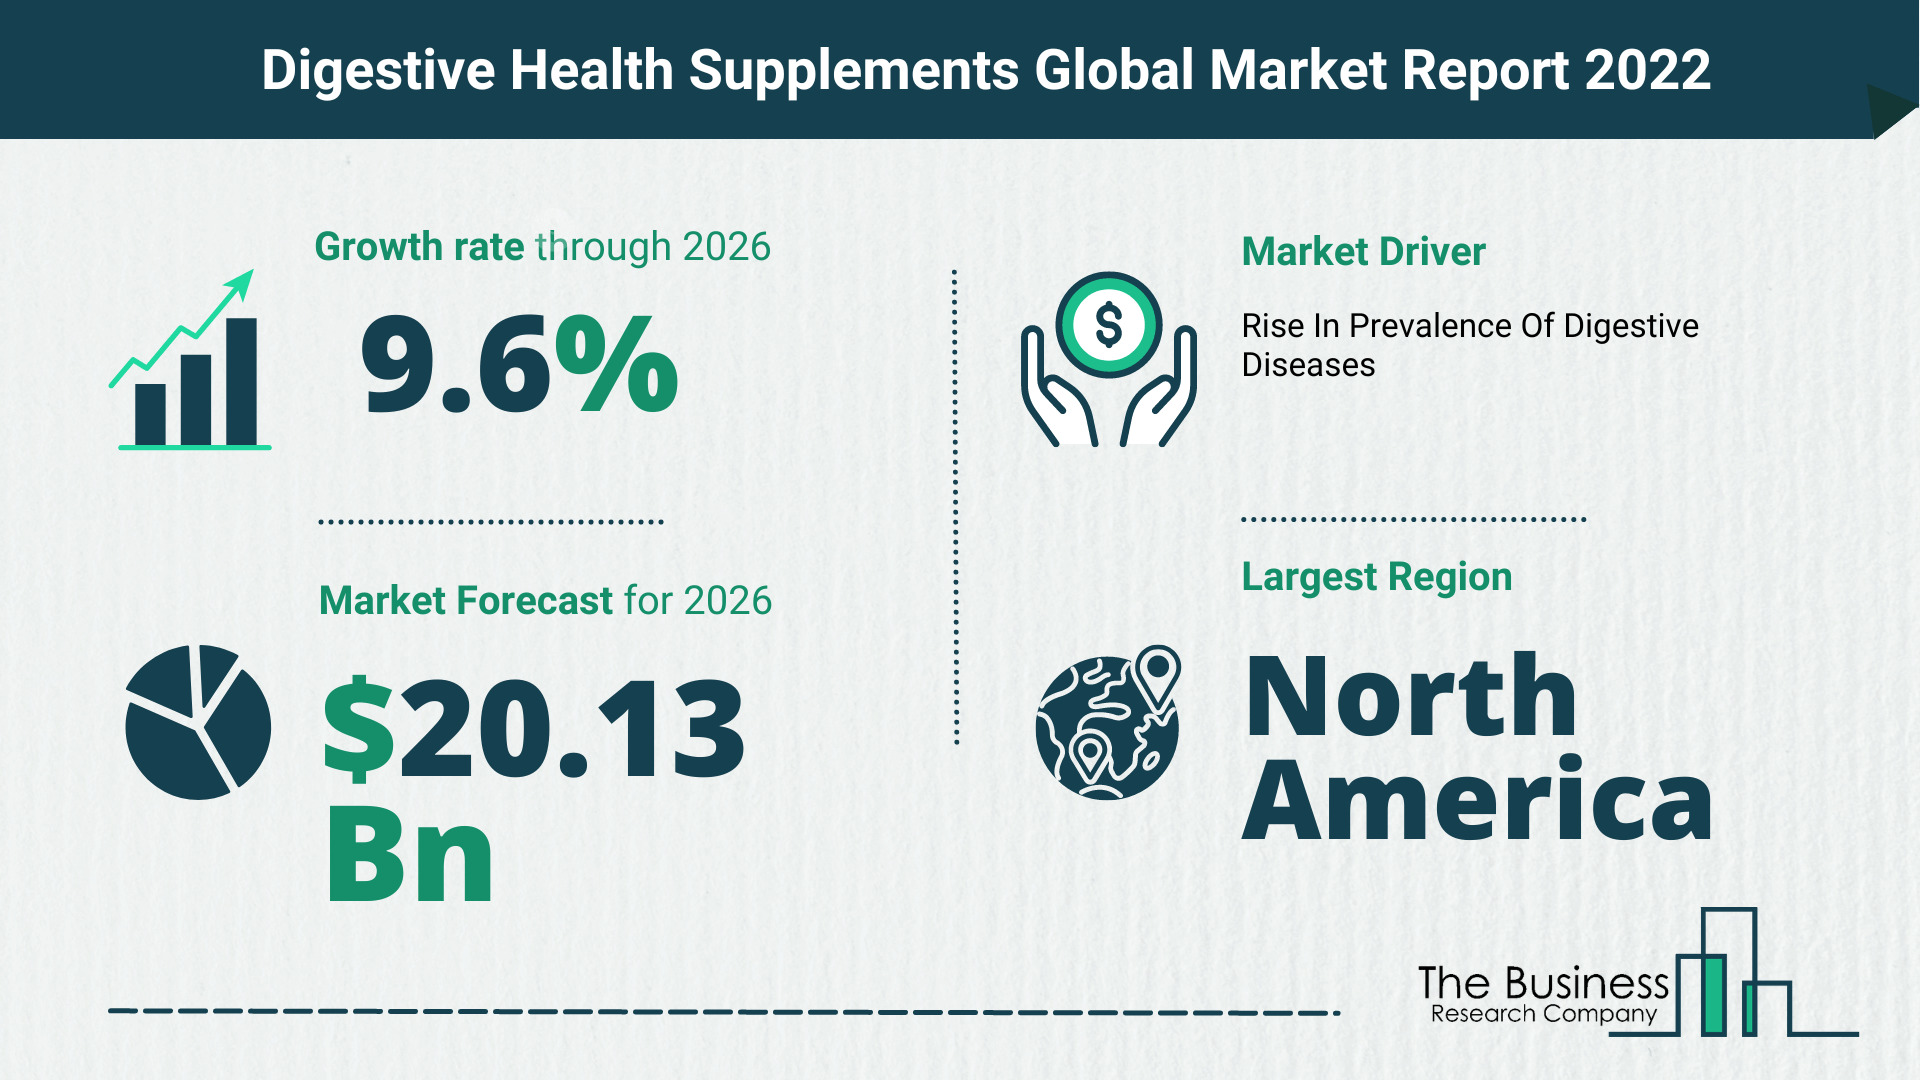 Latest Digestive Health Supplements Market Growth Study 2022-2026 By The Business Research Company